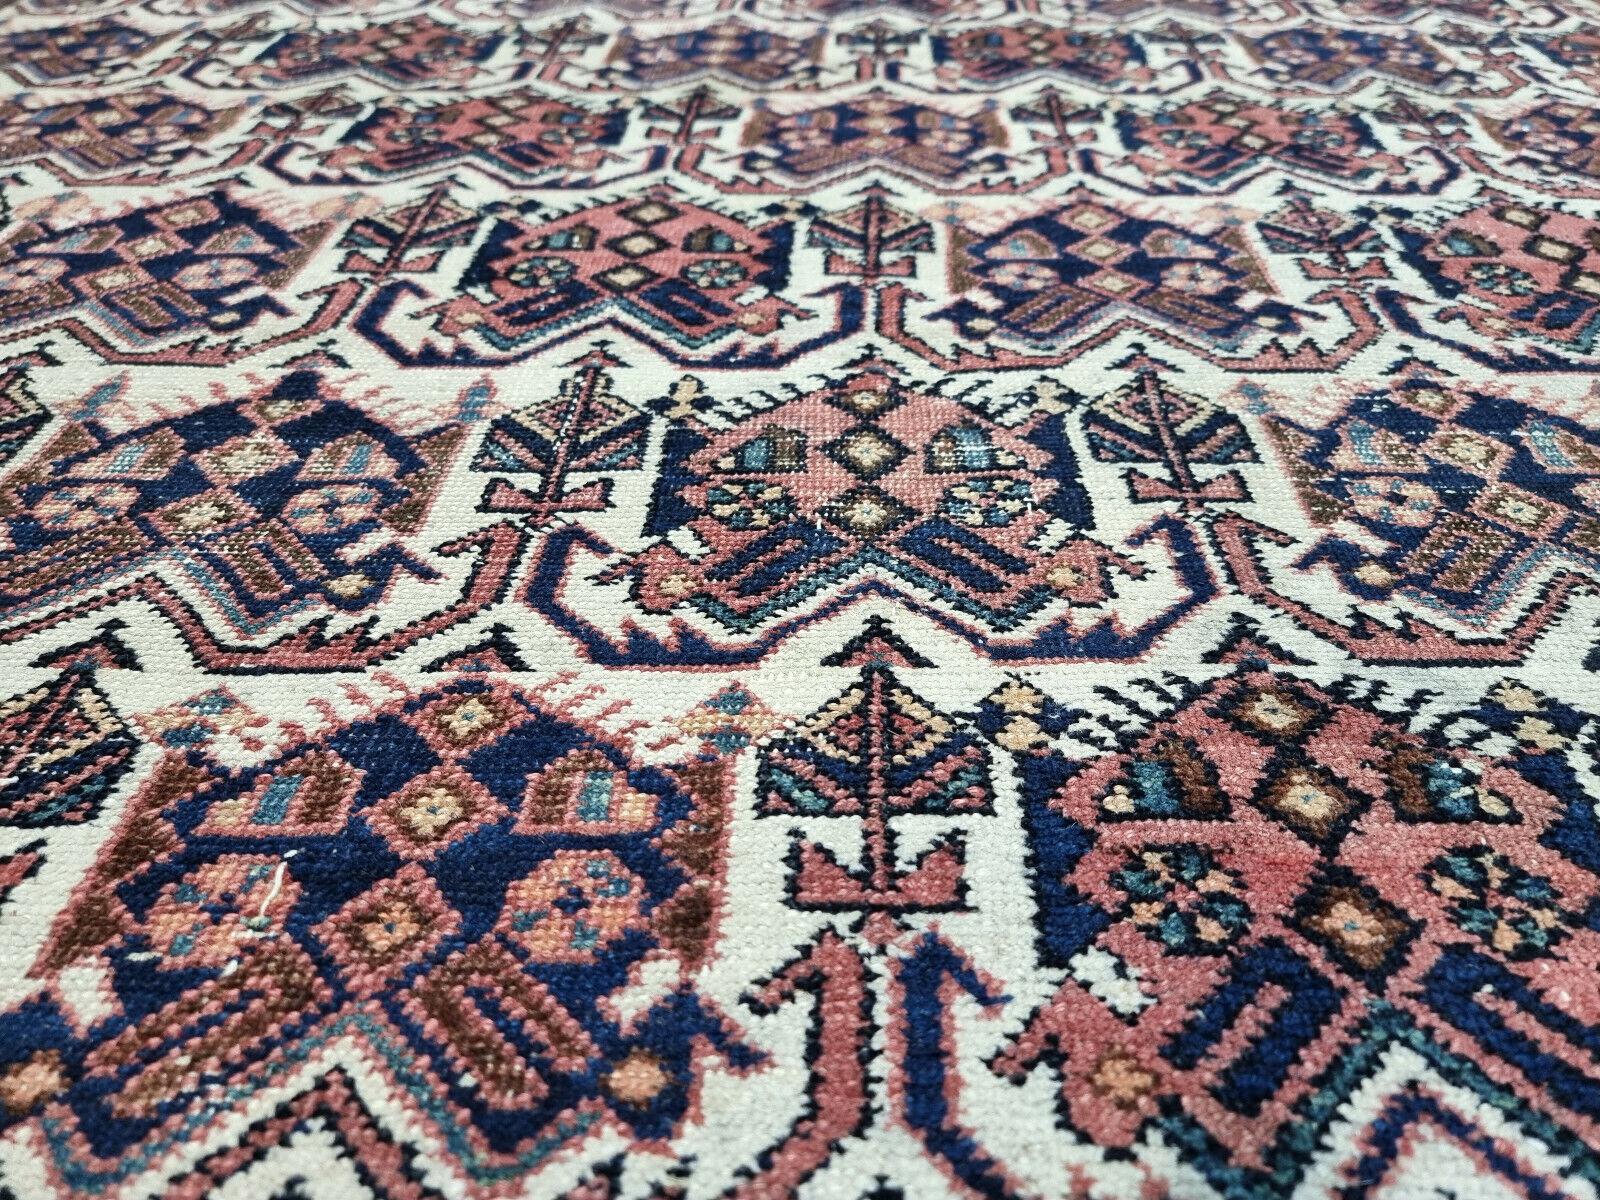 Handmade Antique Persian Style Afshar Rug 5.3' x 6.9', 1920s - 1D96 For Sale 4